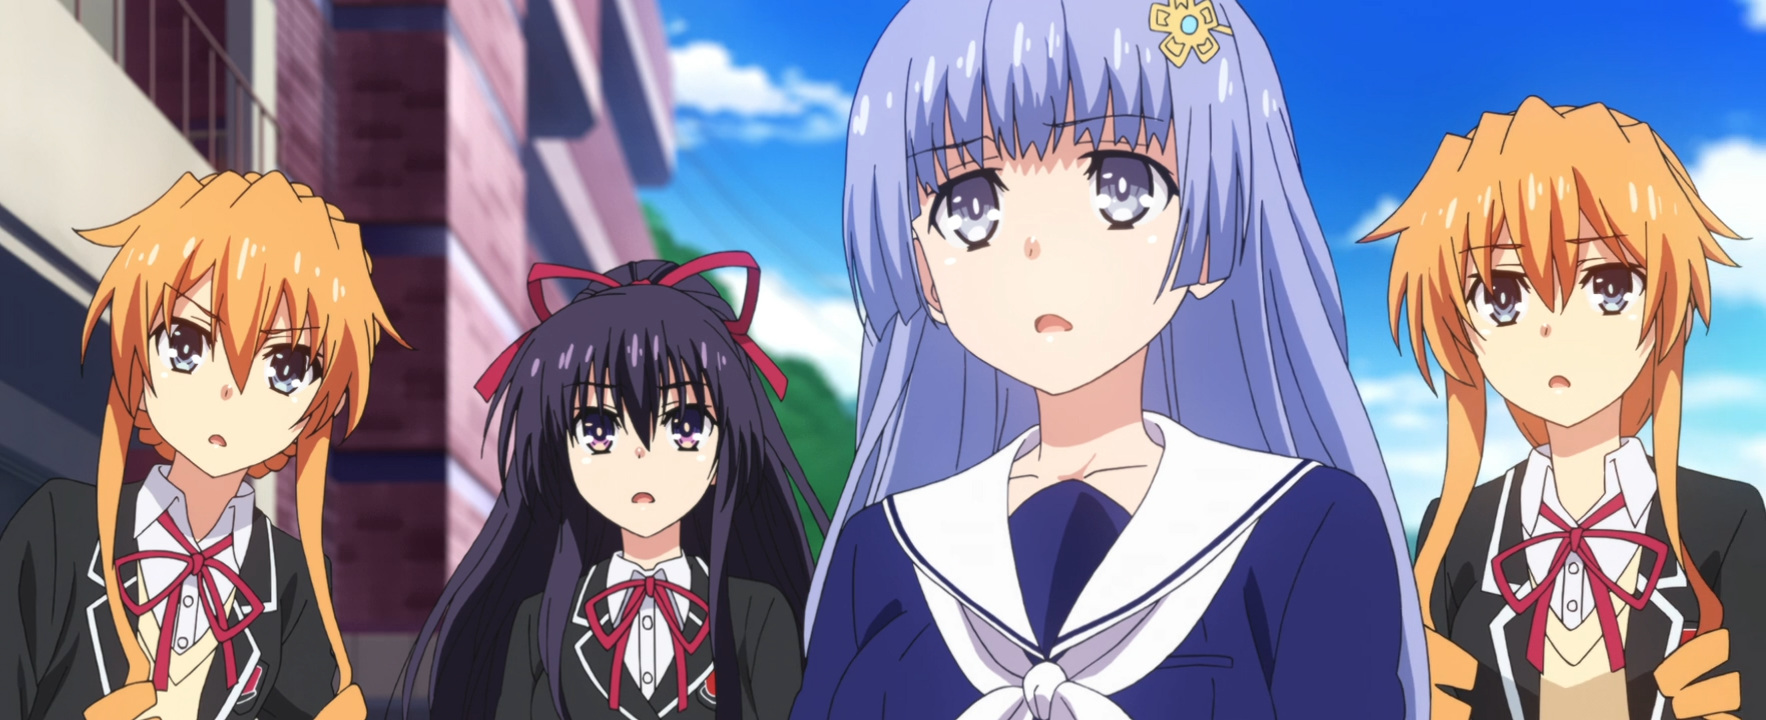 date a live episode 1-12 download english dub